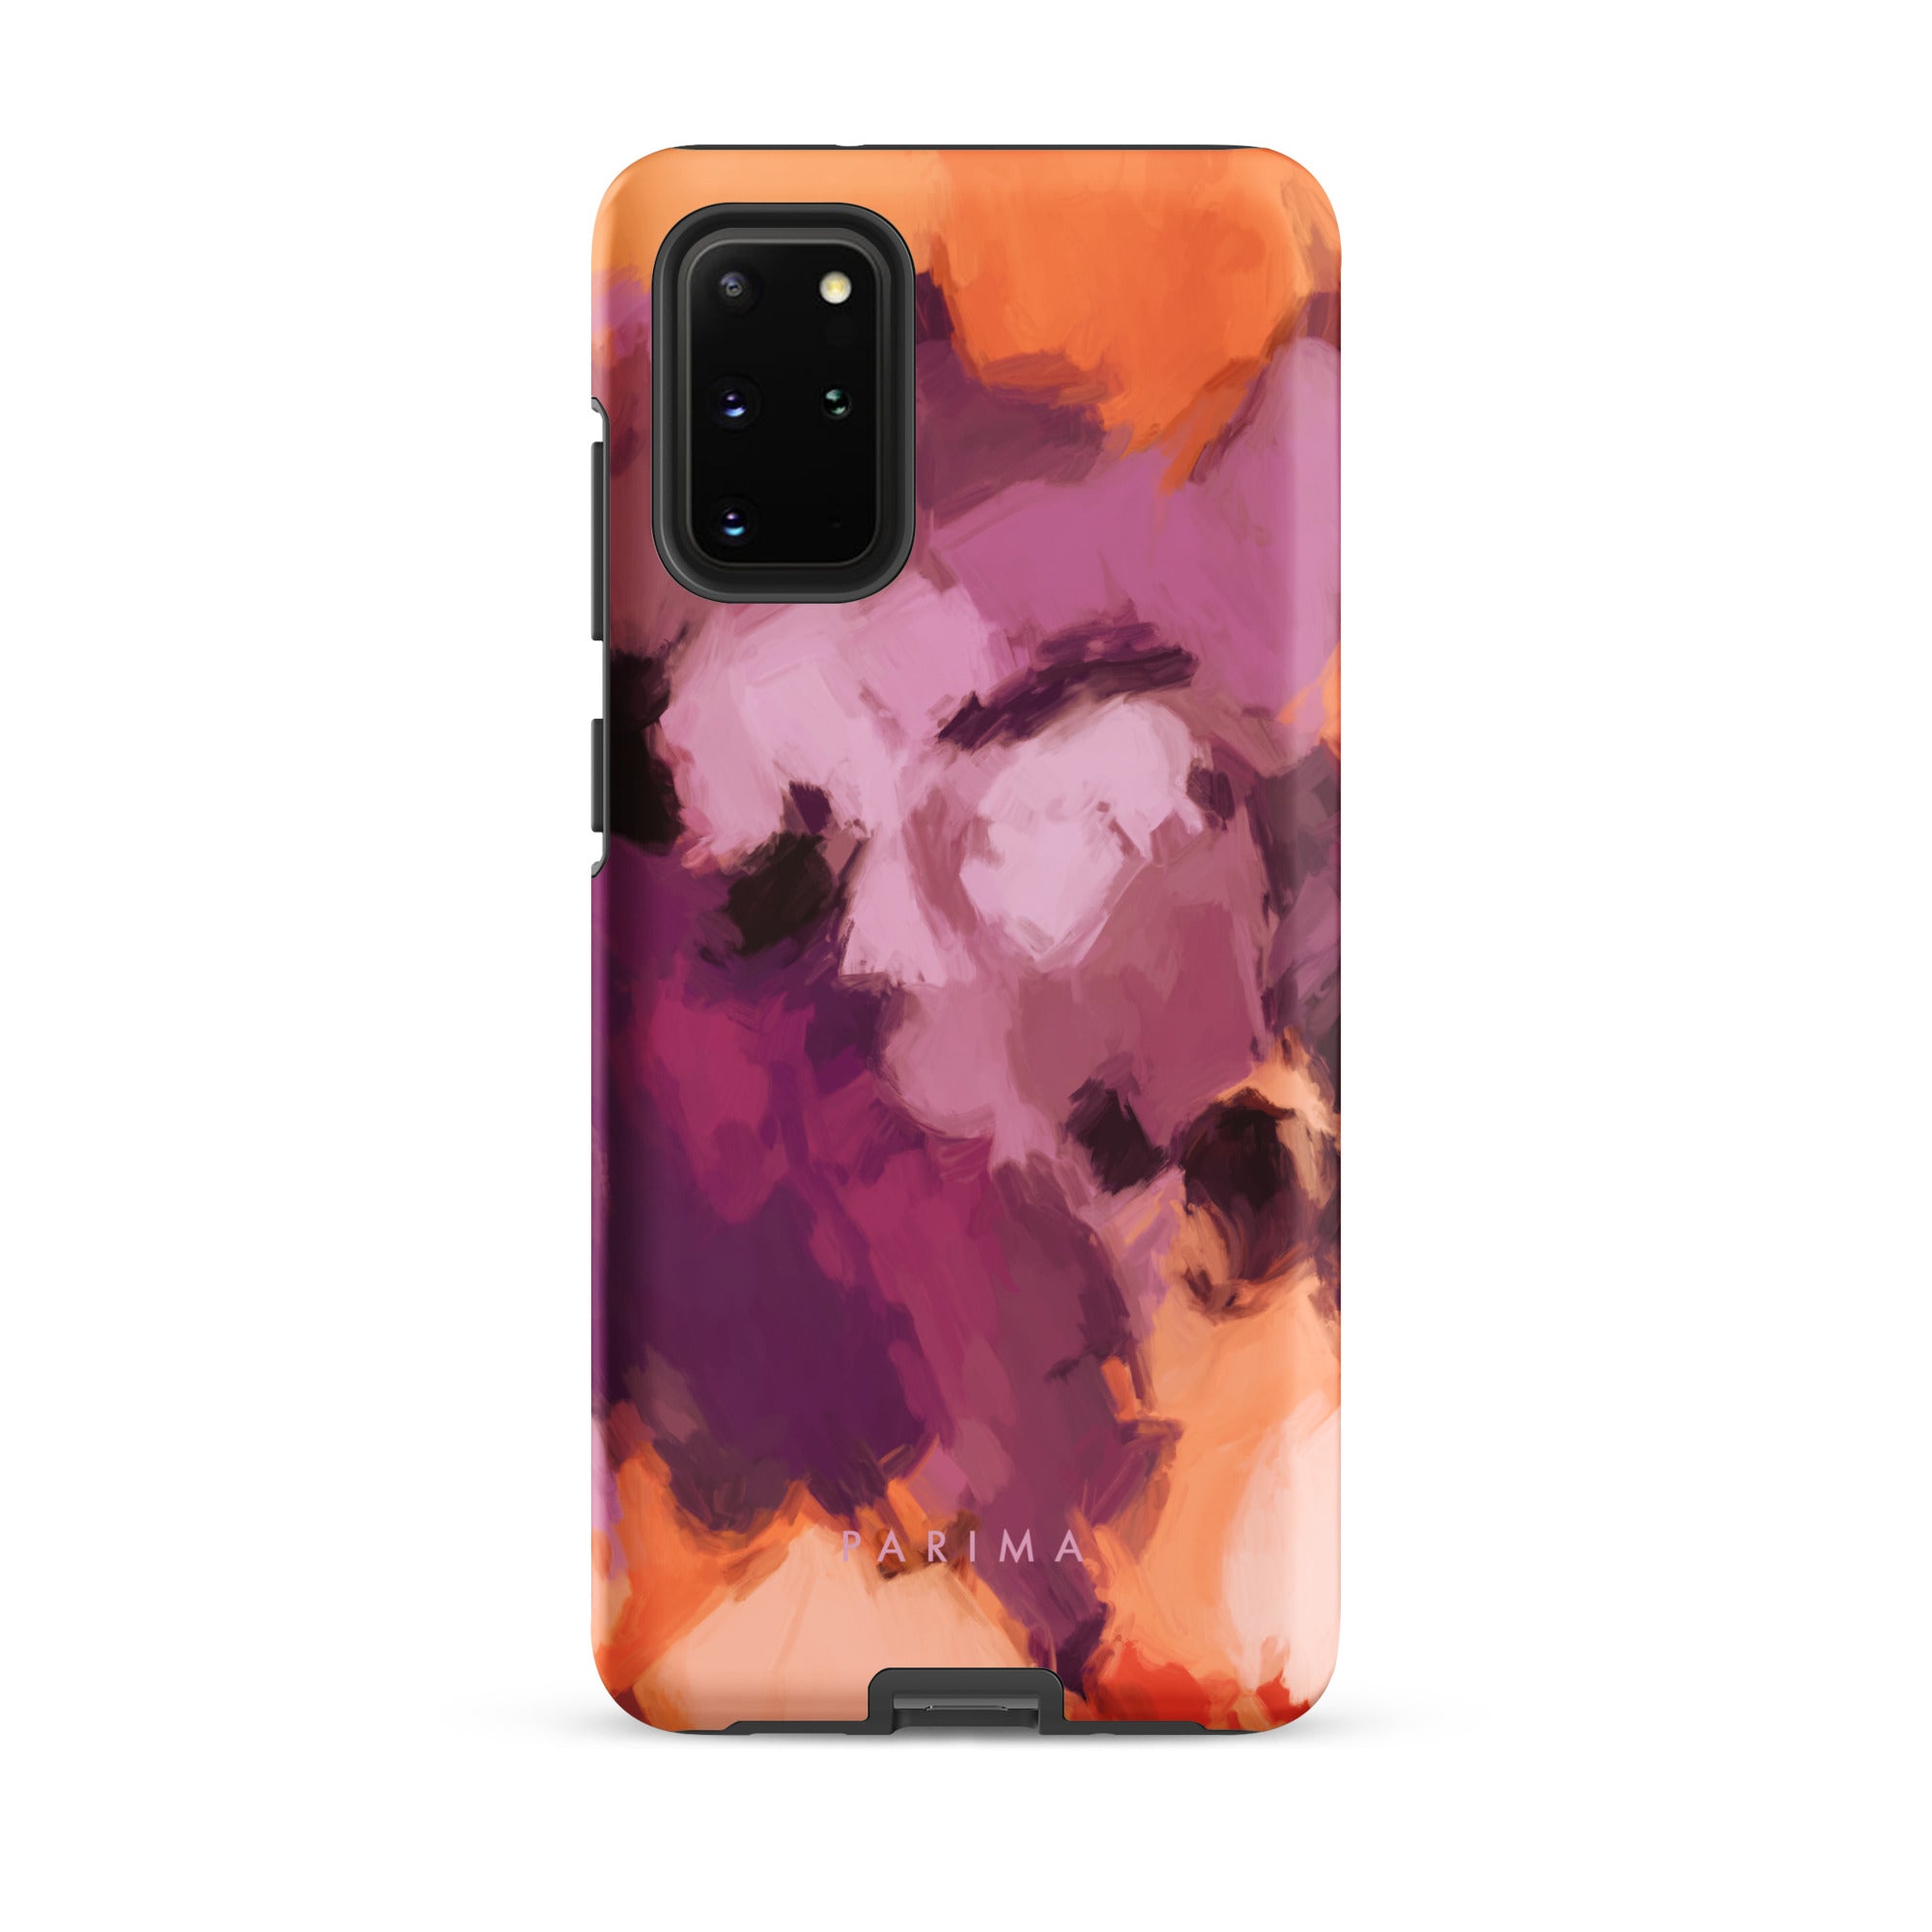 Lilac, purple and orange abstract art on Samsung Galaxy S20 Plus tough case by Parima Studio